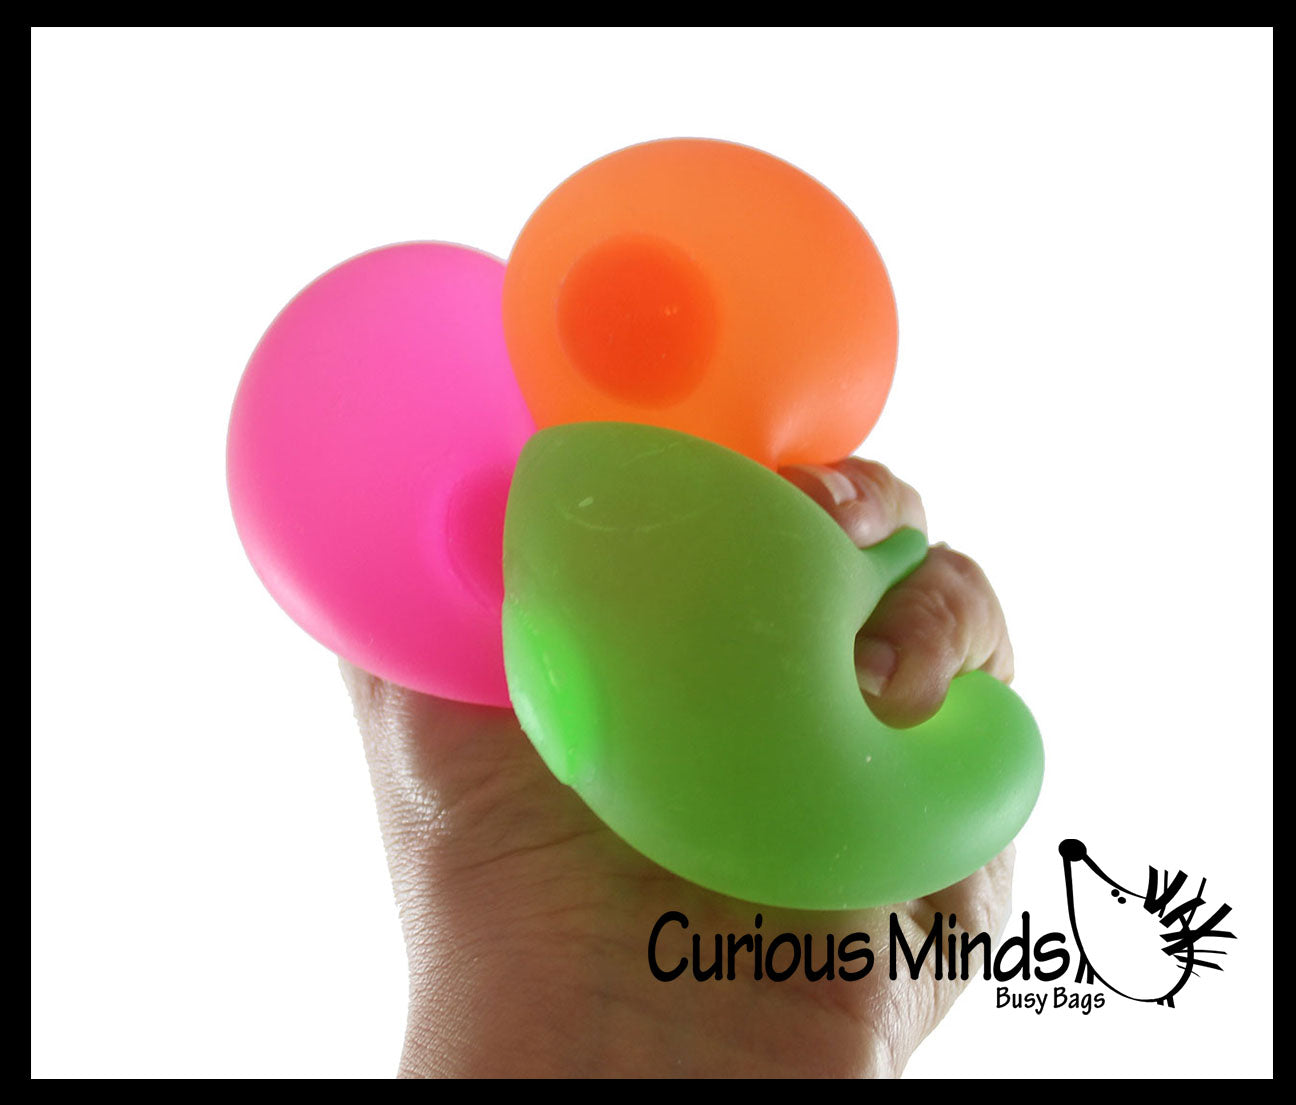 Sugar Ball - Thick Glue/Gel Stretch Ball - Molasses Syrup Ultra Squishy and Moldable Slow Rise Relaxing Sensory Fidget Stress Toy